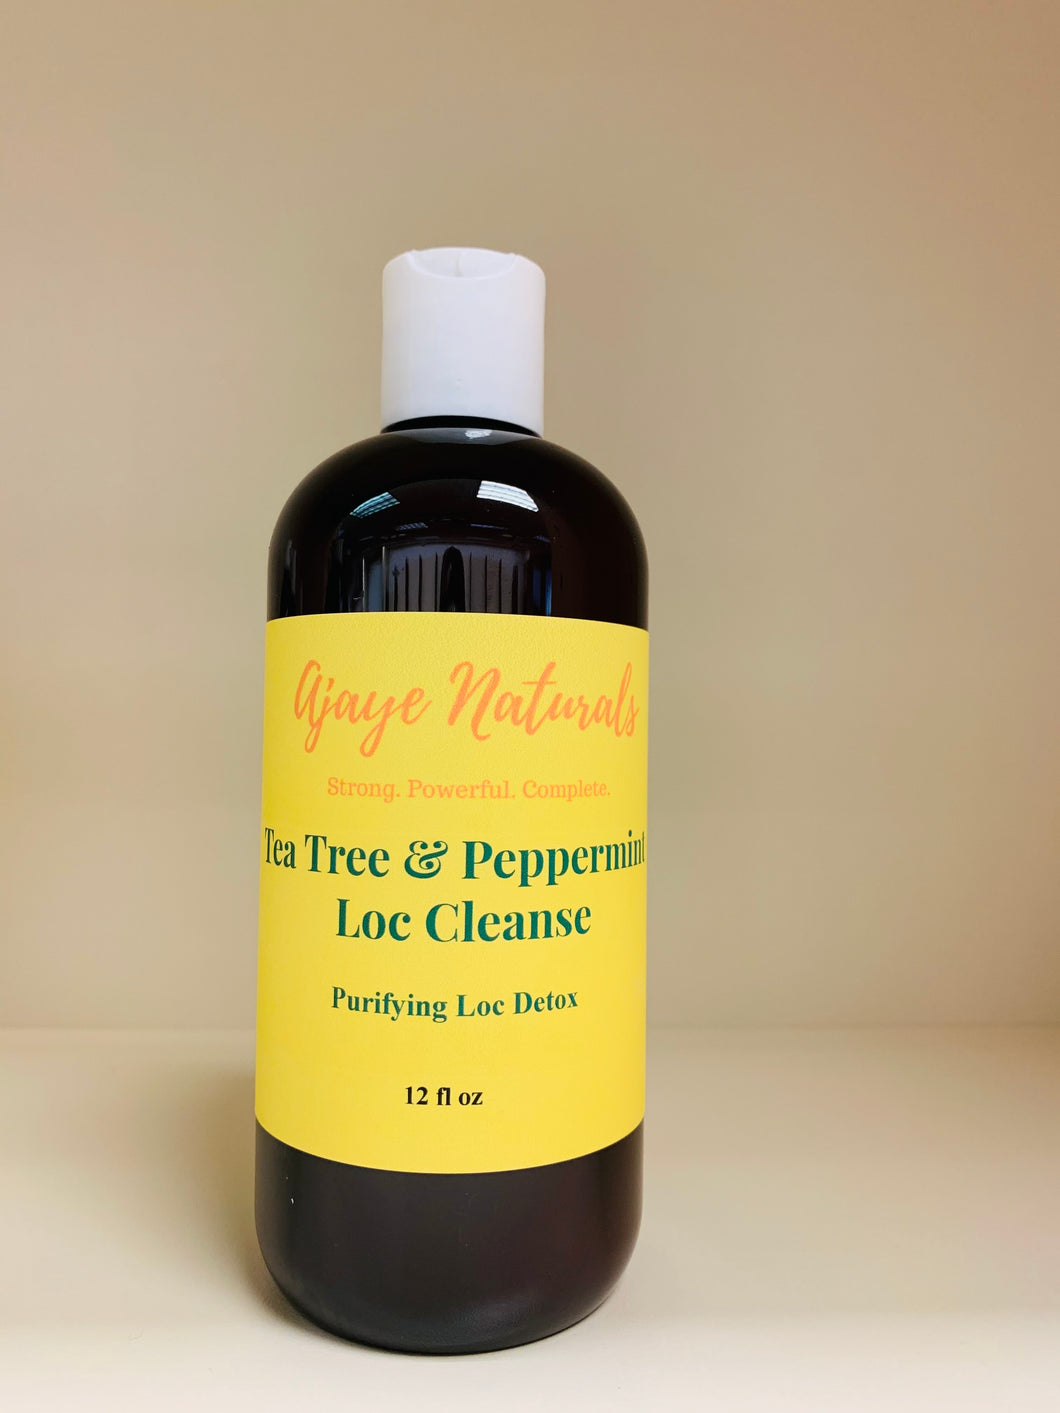 Tree & Peppermint Loc Cleanse